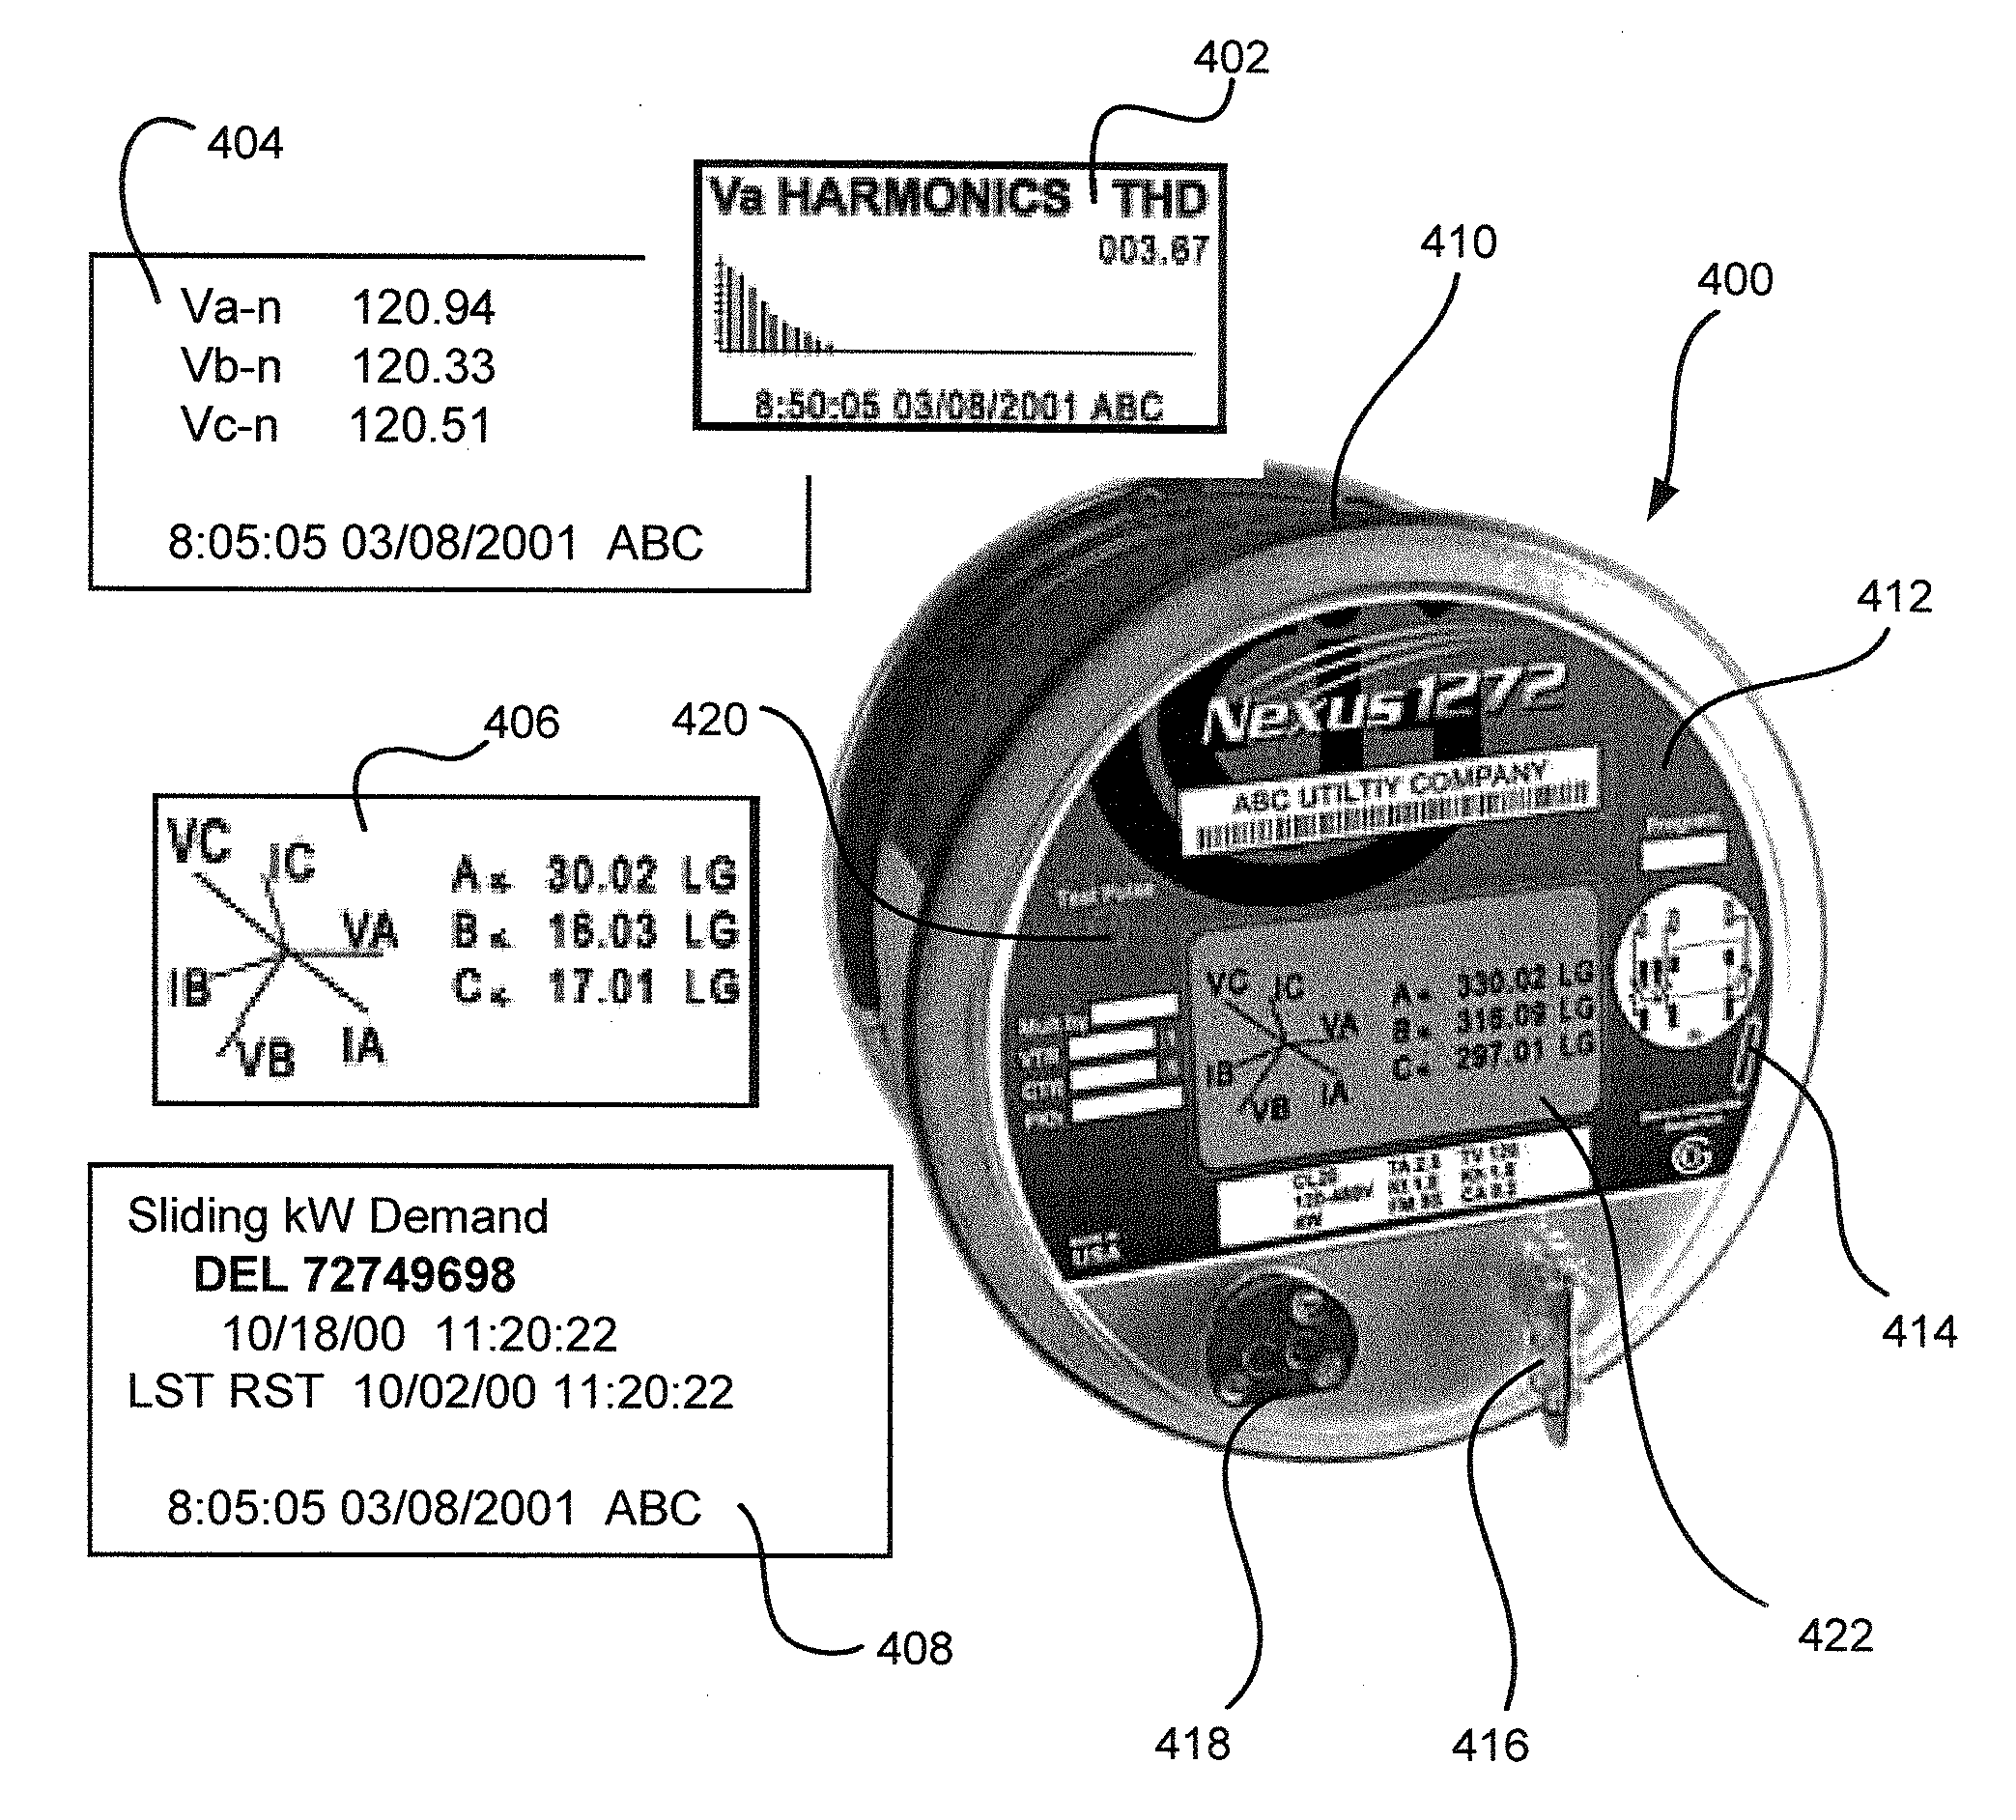 Intelligent electronic device having a programmable display